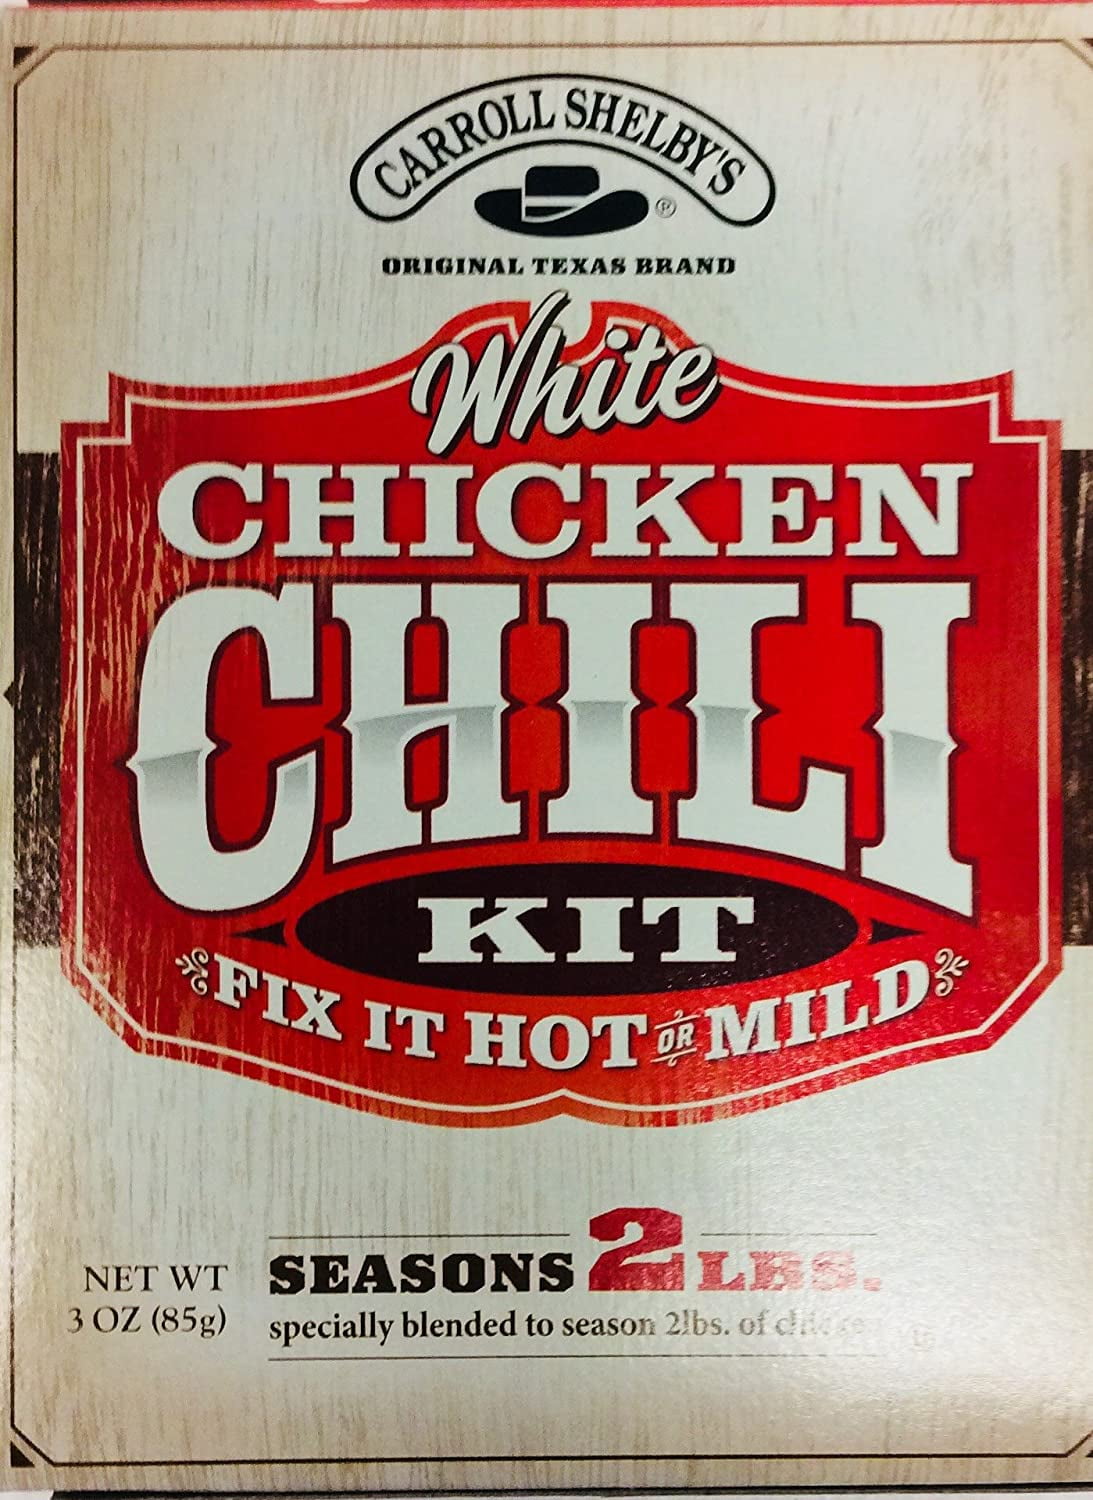 Carroll Shelby's White Chicken Chili Kit, 3 oz - Smith's Food and Drug